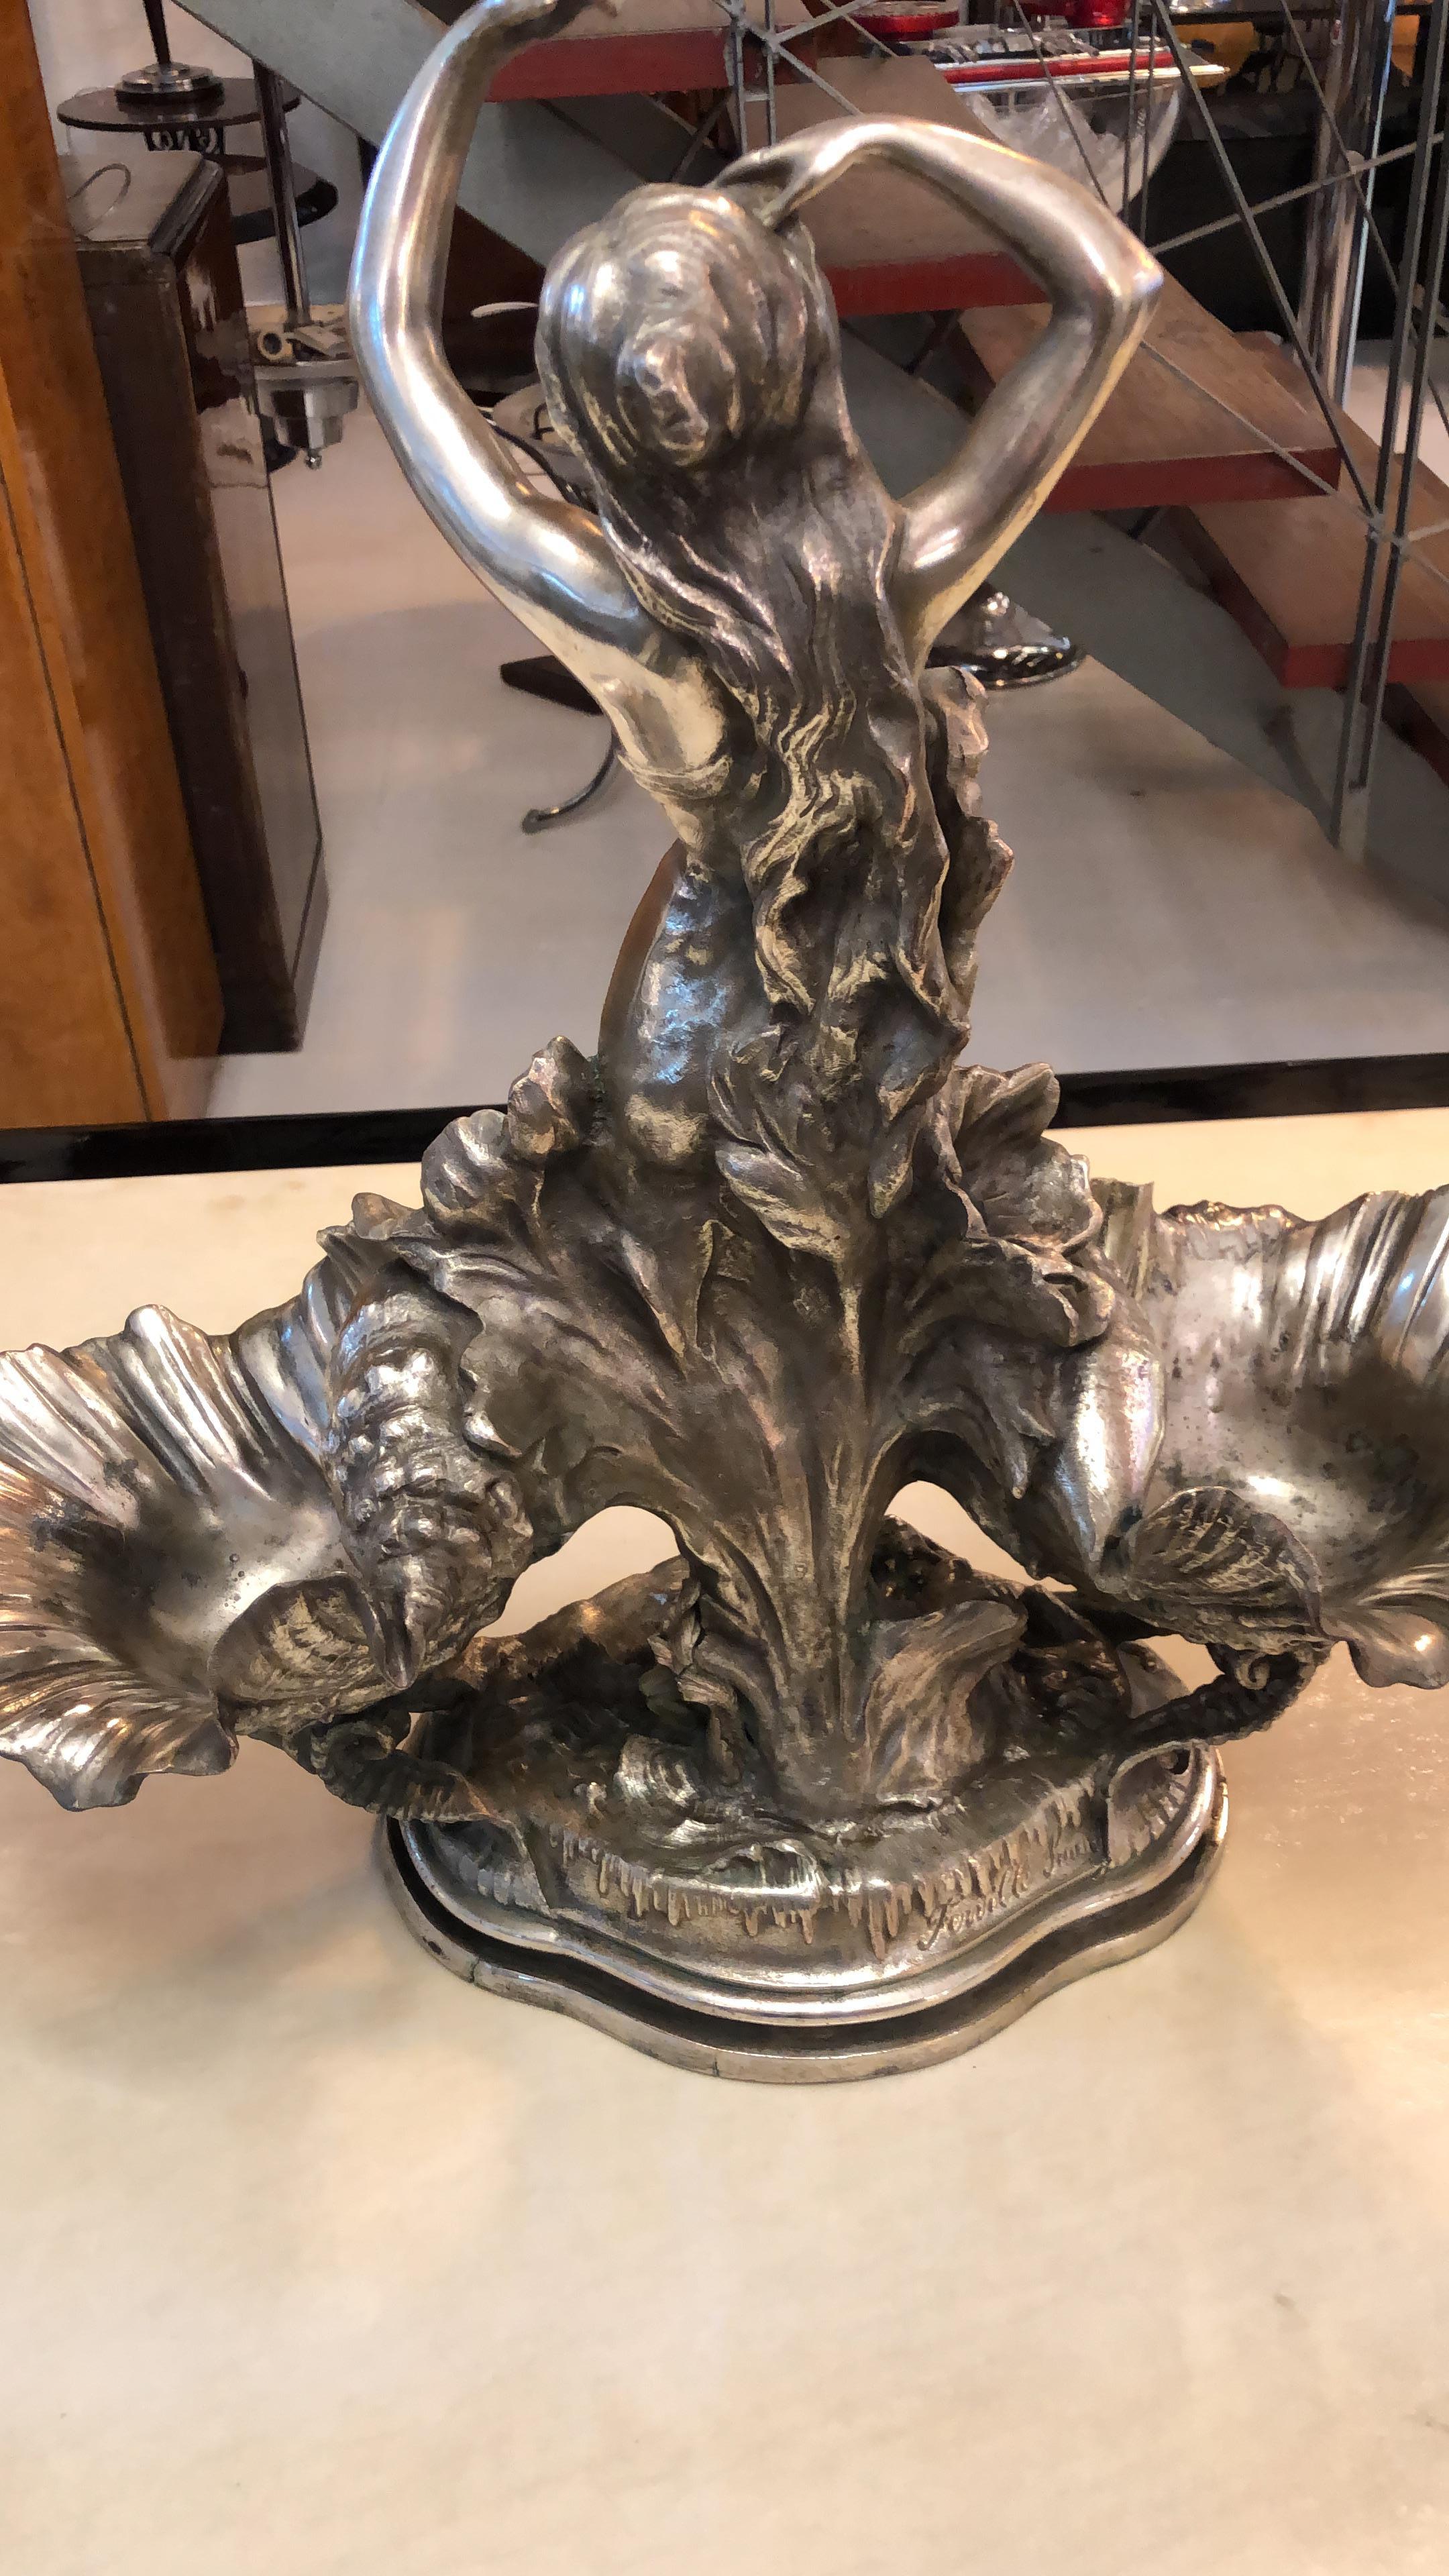 Dish of masses or sweets,
Materials : Silver plated 
Charles Georges Ferville-Suan was a French sculptor.
He was born in Le Mans, in Sarthe, on 16 January 1847, and was adopted by the painter Charles Suan. He lived during a certain period in